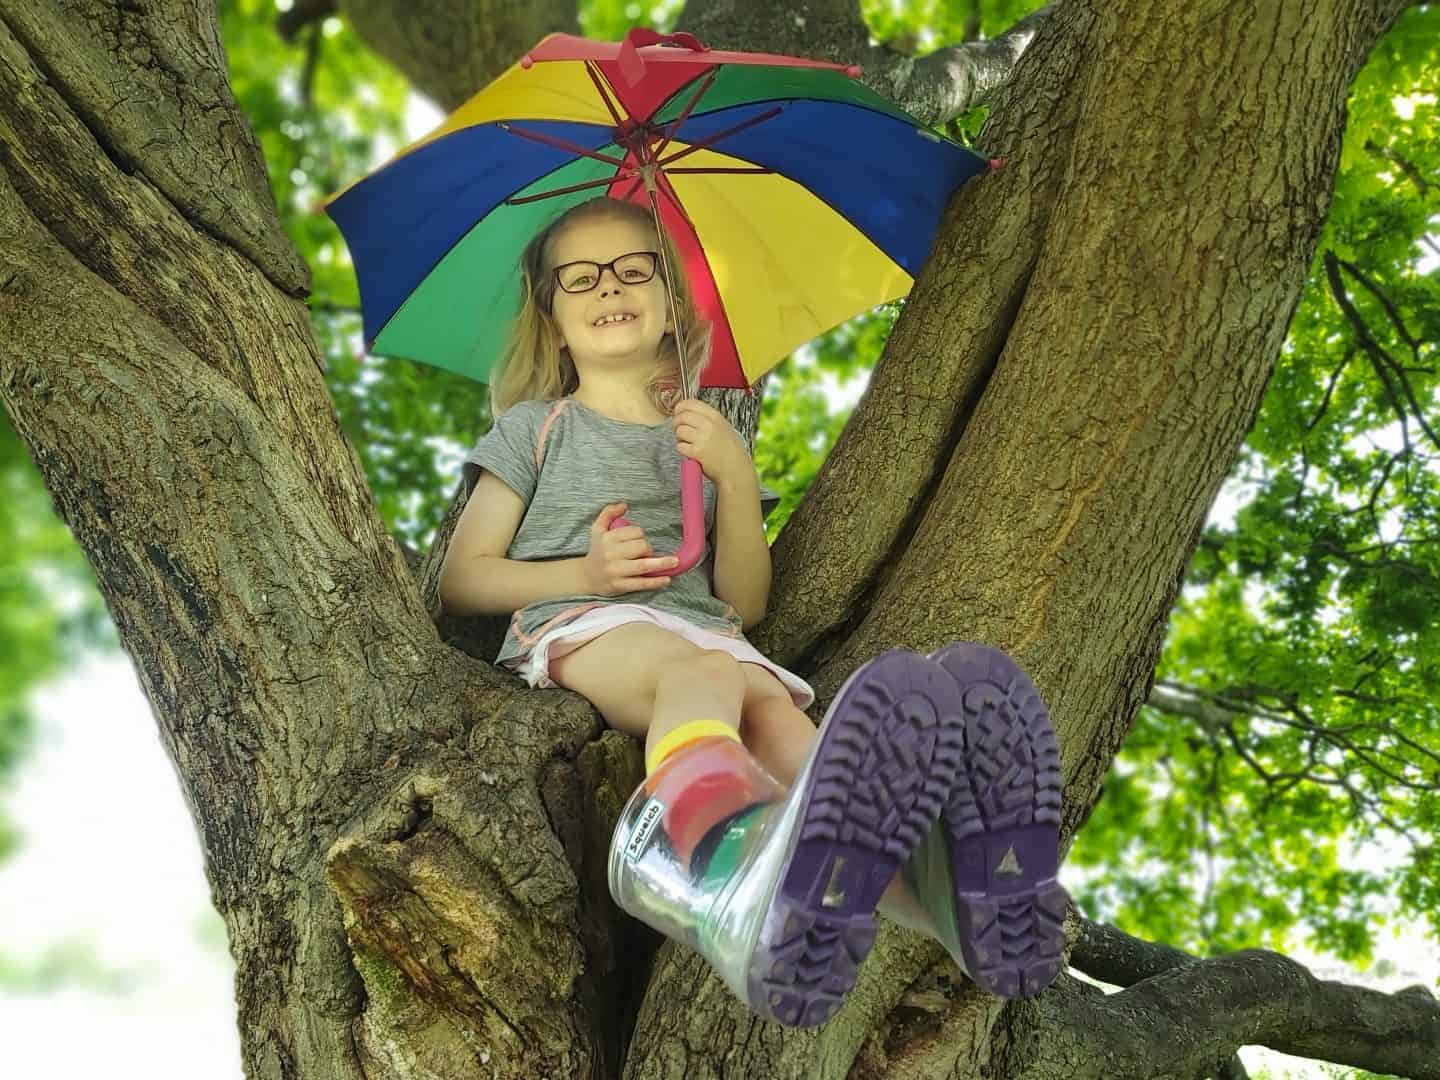 Little girl with rainbow umbrella sitting in a tree wearing squelch wellies and rainbow socks facing forwards